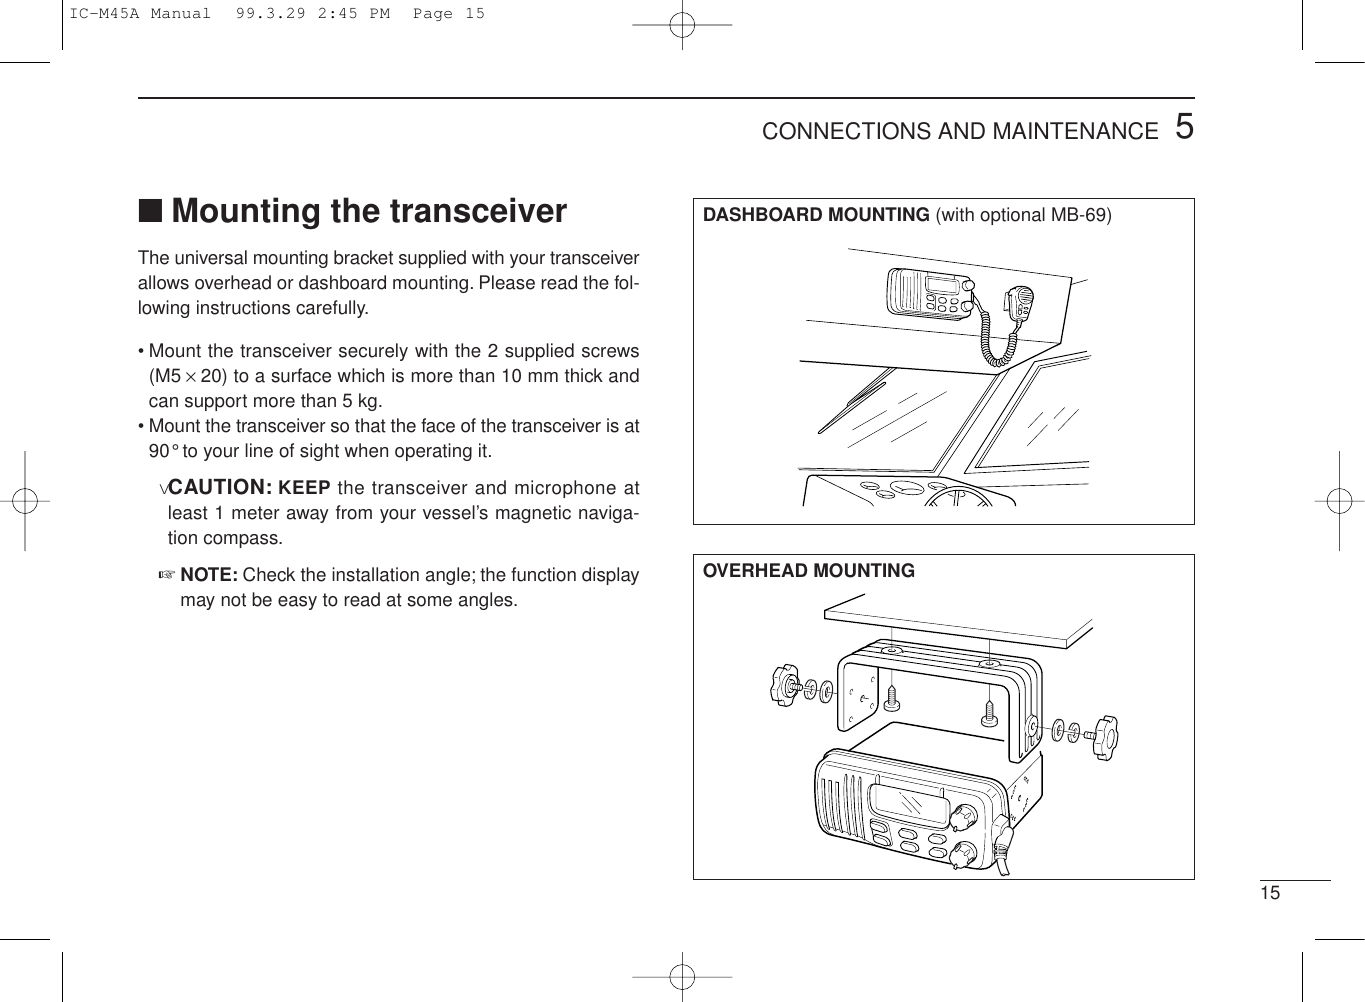 155CONNECTIONS AND MAINTENANCE■Mounting the transceiverThe universal mounting bracket supplied with your transceiverallows overhead or dashboard mounting. Please read the fol-lowing instructions carefully.• Mount the transceiver securely with the 2 supplied screws(M5 ×20) to a surface which is more than 10 mm thick andcan support more than 5 kg.• Mount the transceiver so that the face of the transceiver is at90° to your line of sight when operating it.vCAUTION: KEEP the transceiver and microphone atleast 1 meter away from your vessel’s magnetic naviga-tion compass.☞NOTE: Check the installation angle; the function displaymay not be easy to read at some angles.DASHBOARD MOUNTING (with optional MB-69)OVERHEAD MOUNTINGIC-M45A Manual  99.3.29 2:45 PM  Page 15